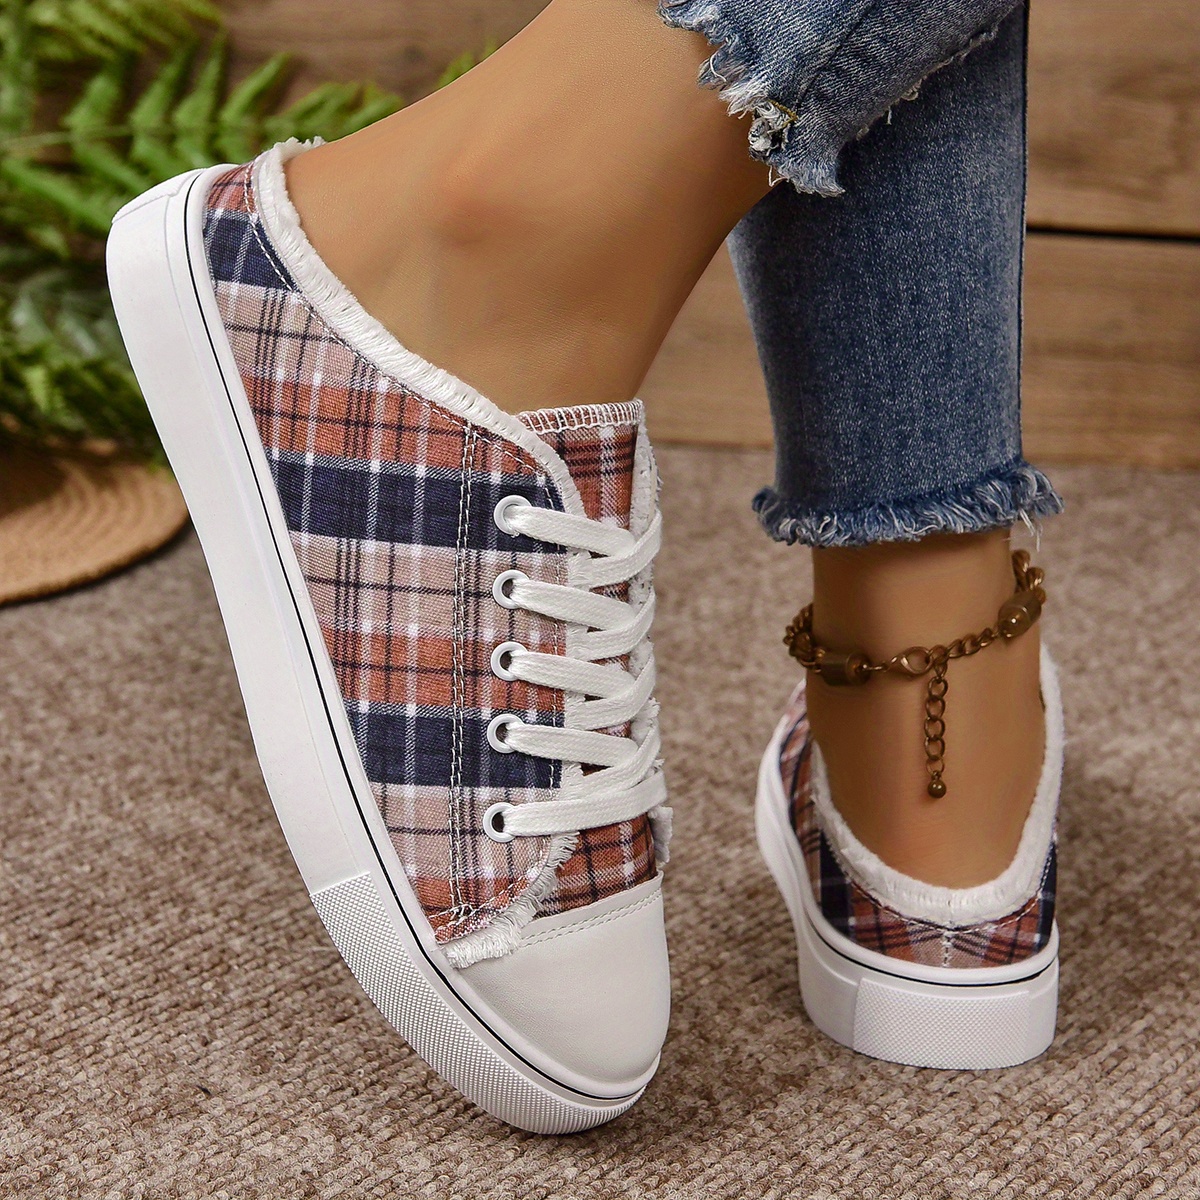 Cycle-Topshop Buffalo Plaid Slip On Shoes Flat Sole Lace Up Casual Canvas  Shoes For Women Christmas New